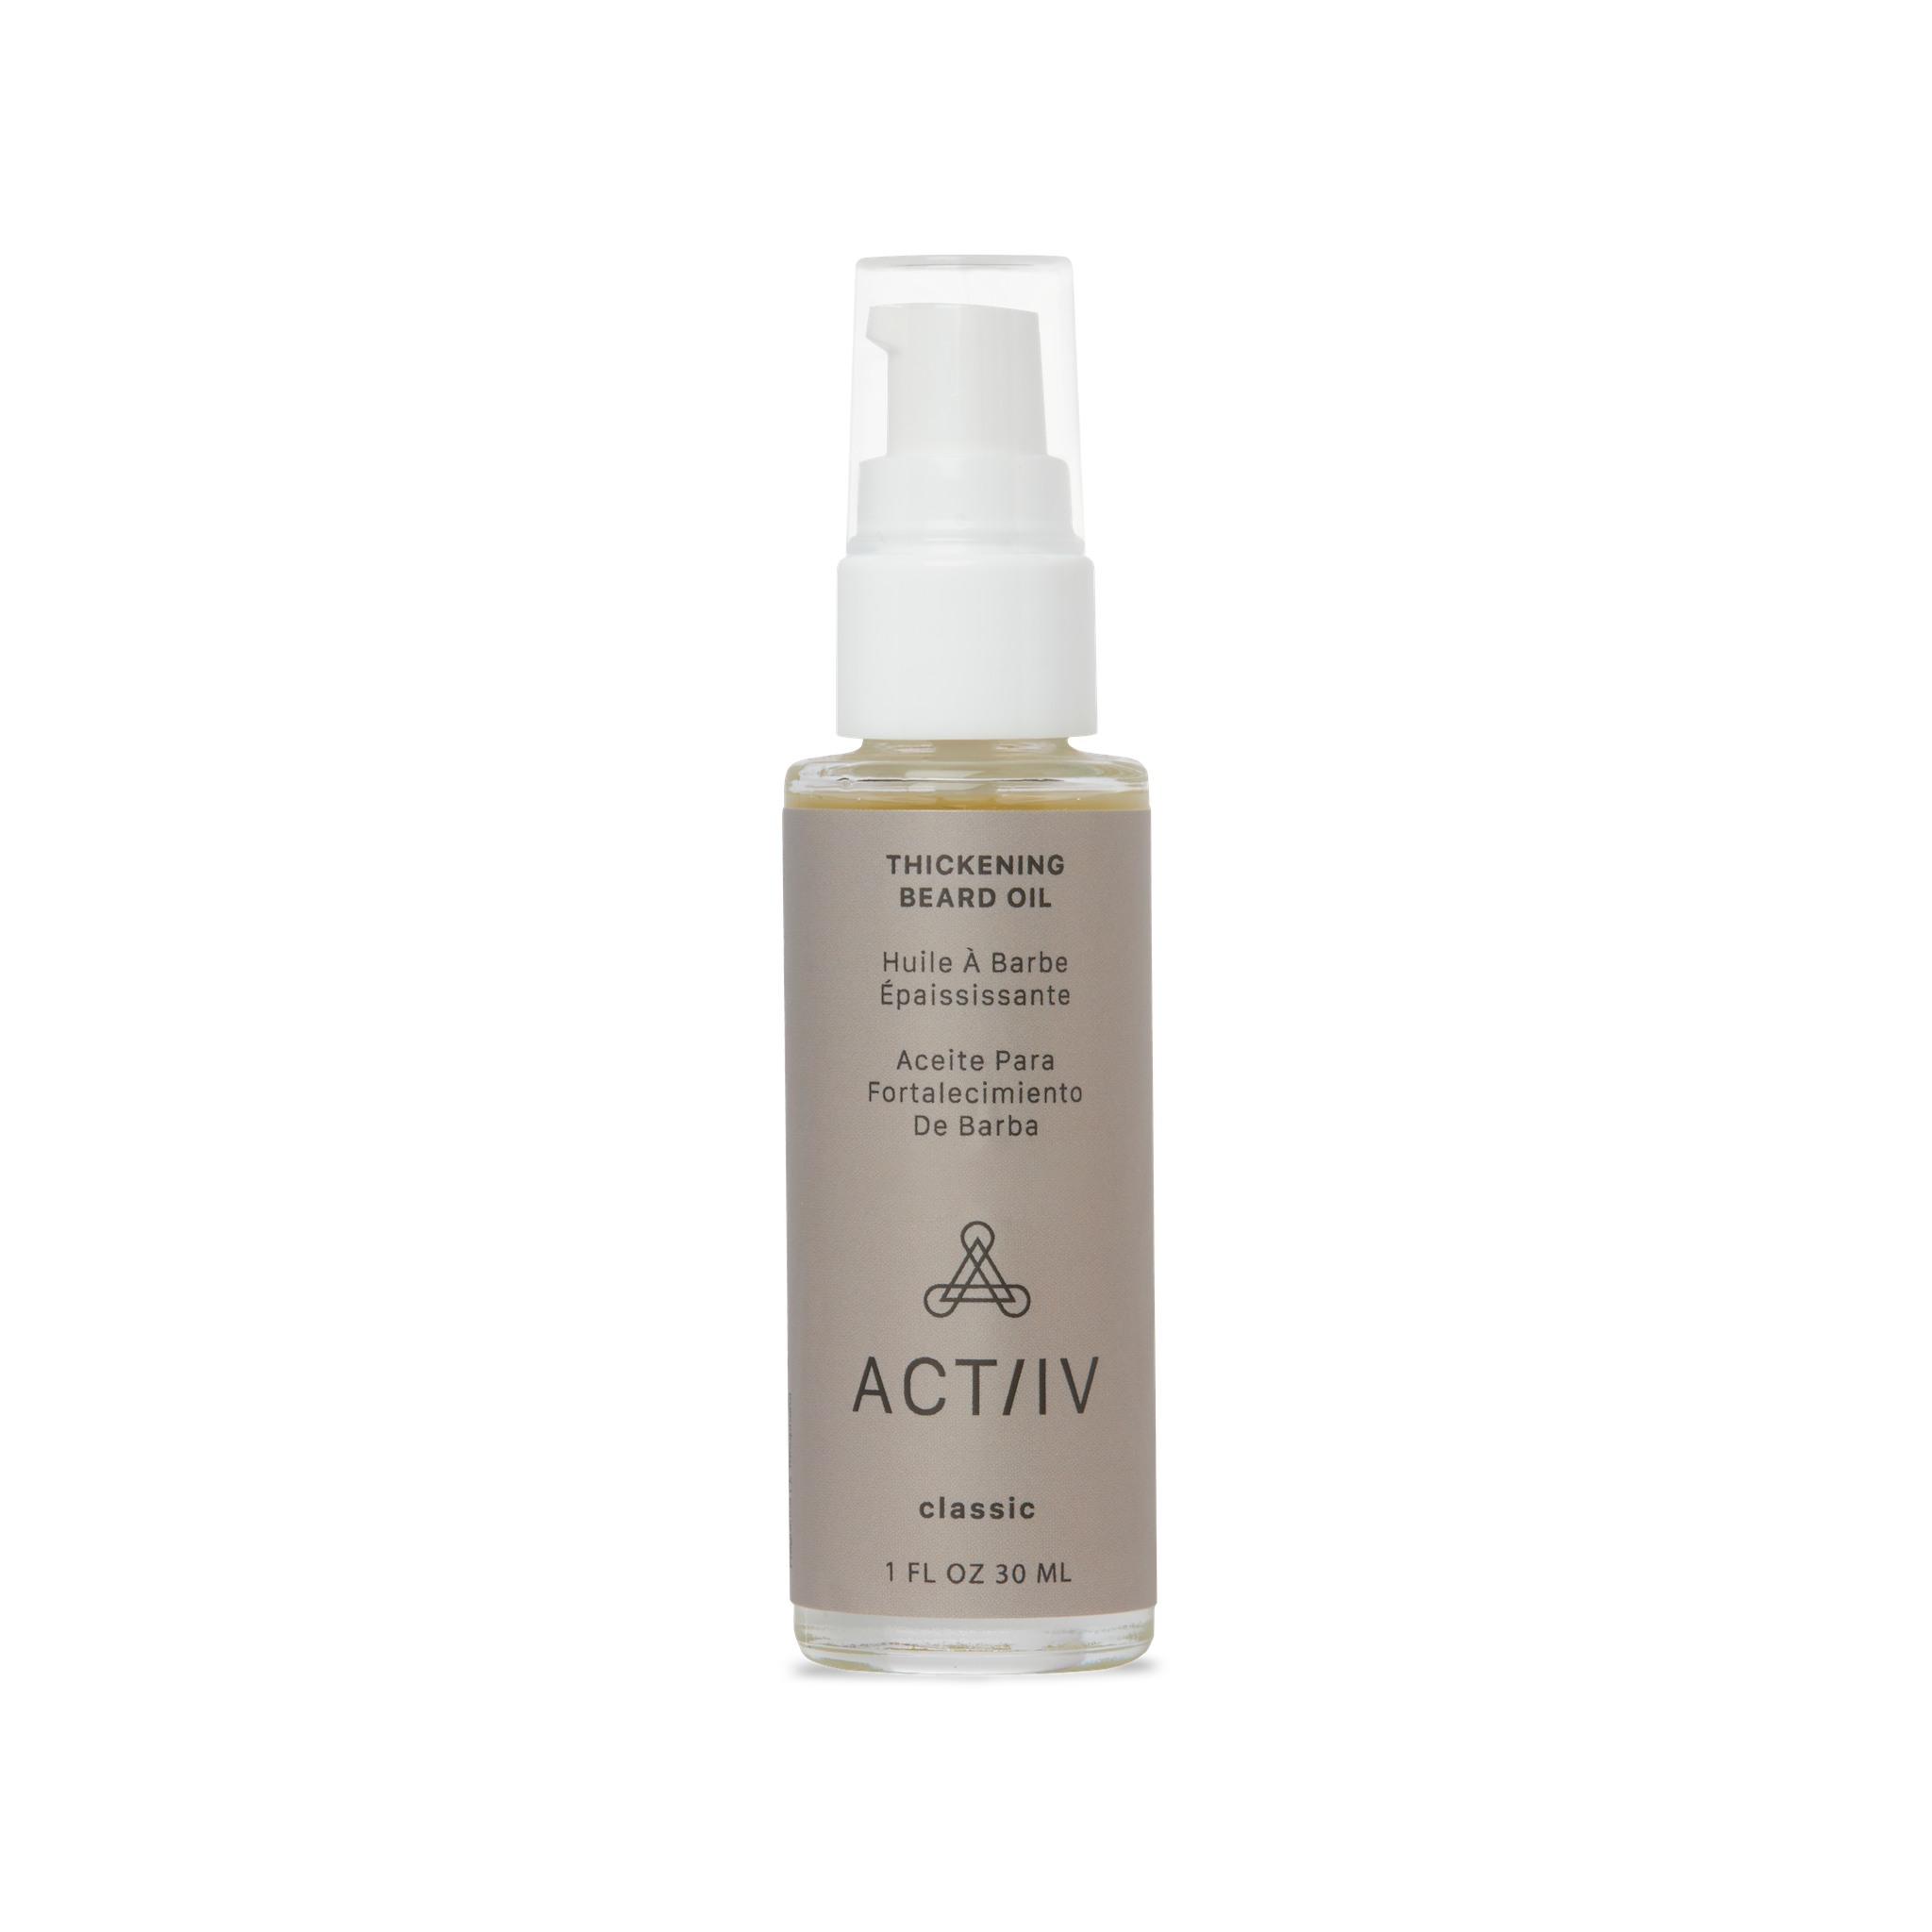 Actiiv THICKENING BEARD OIL - CLASSIC SCENT BOTTLE